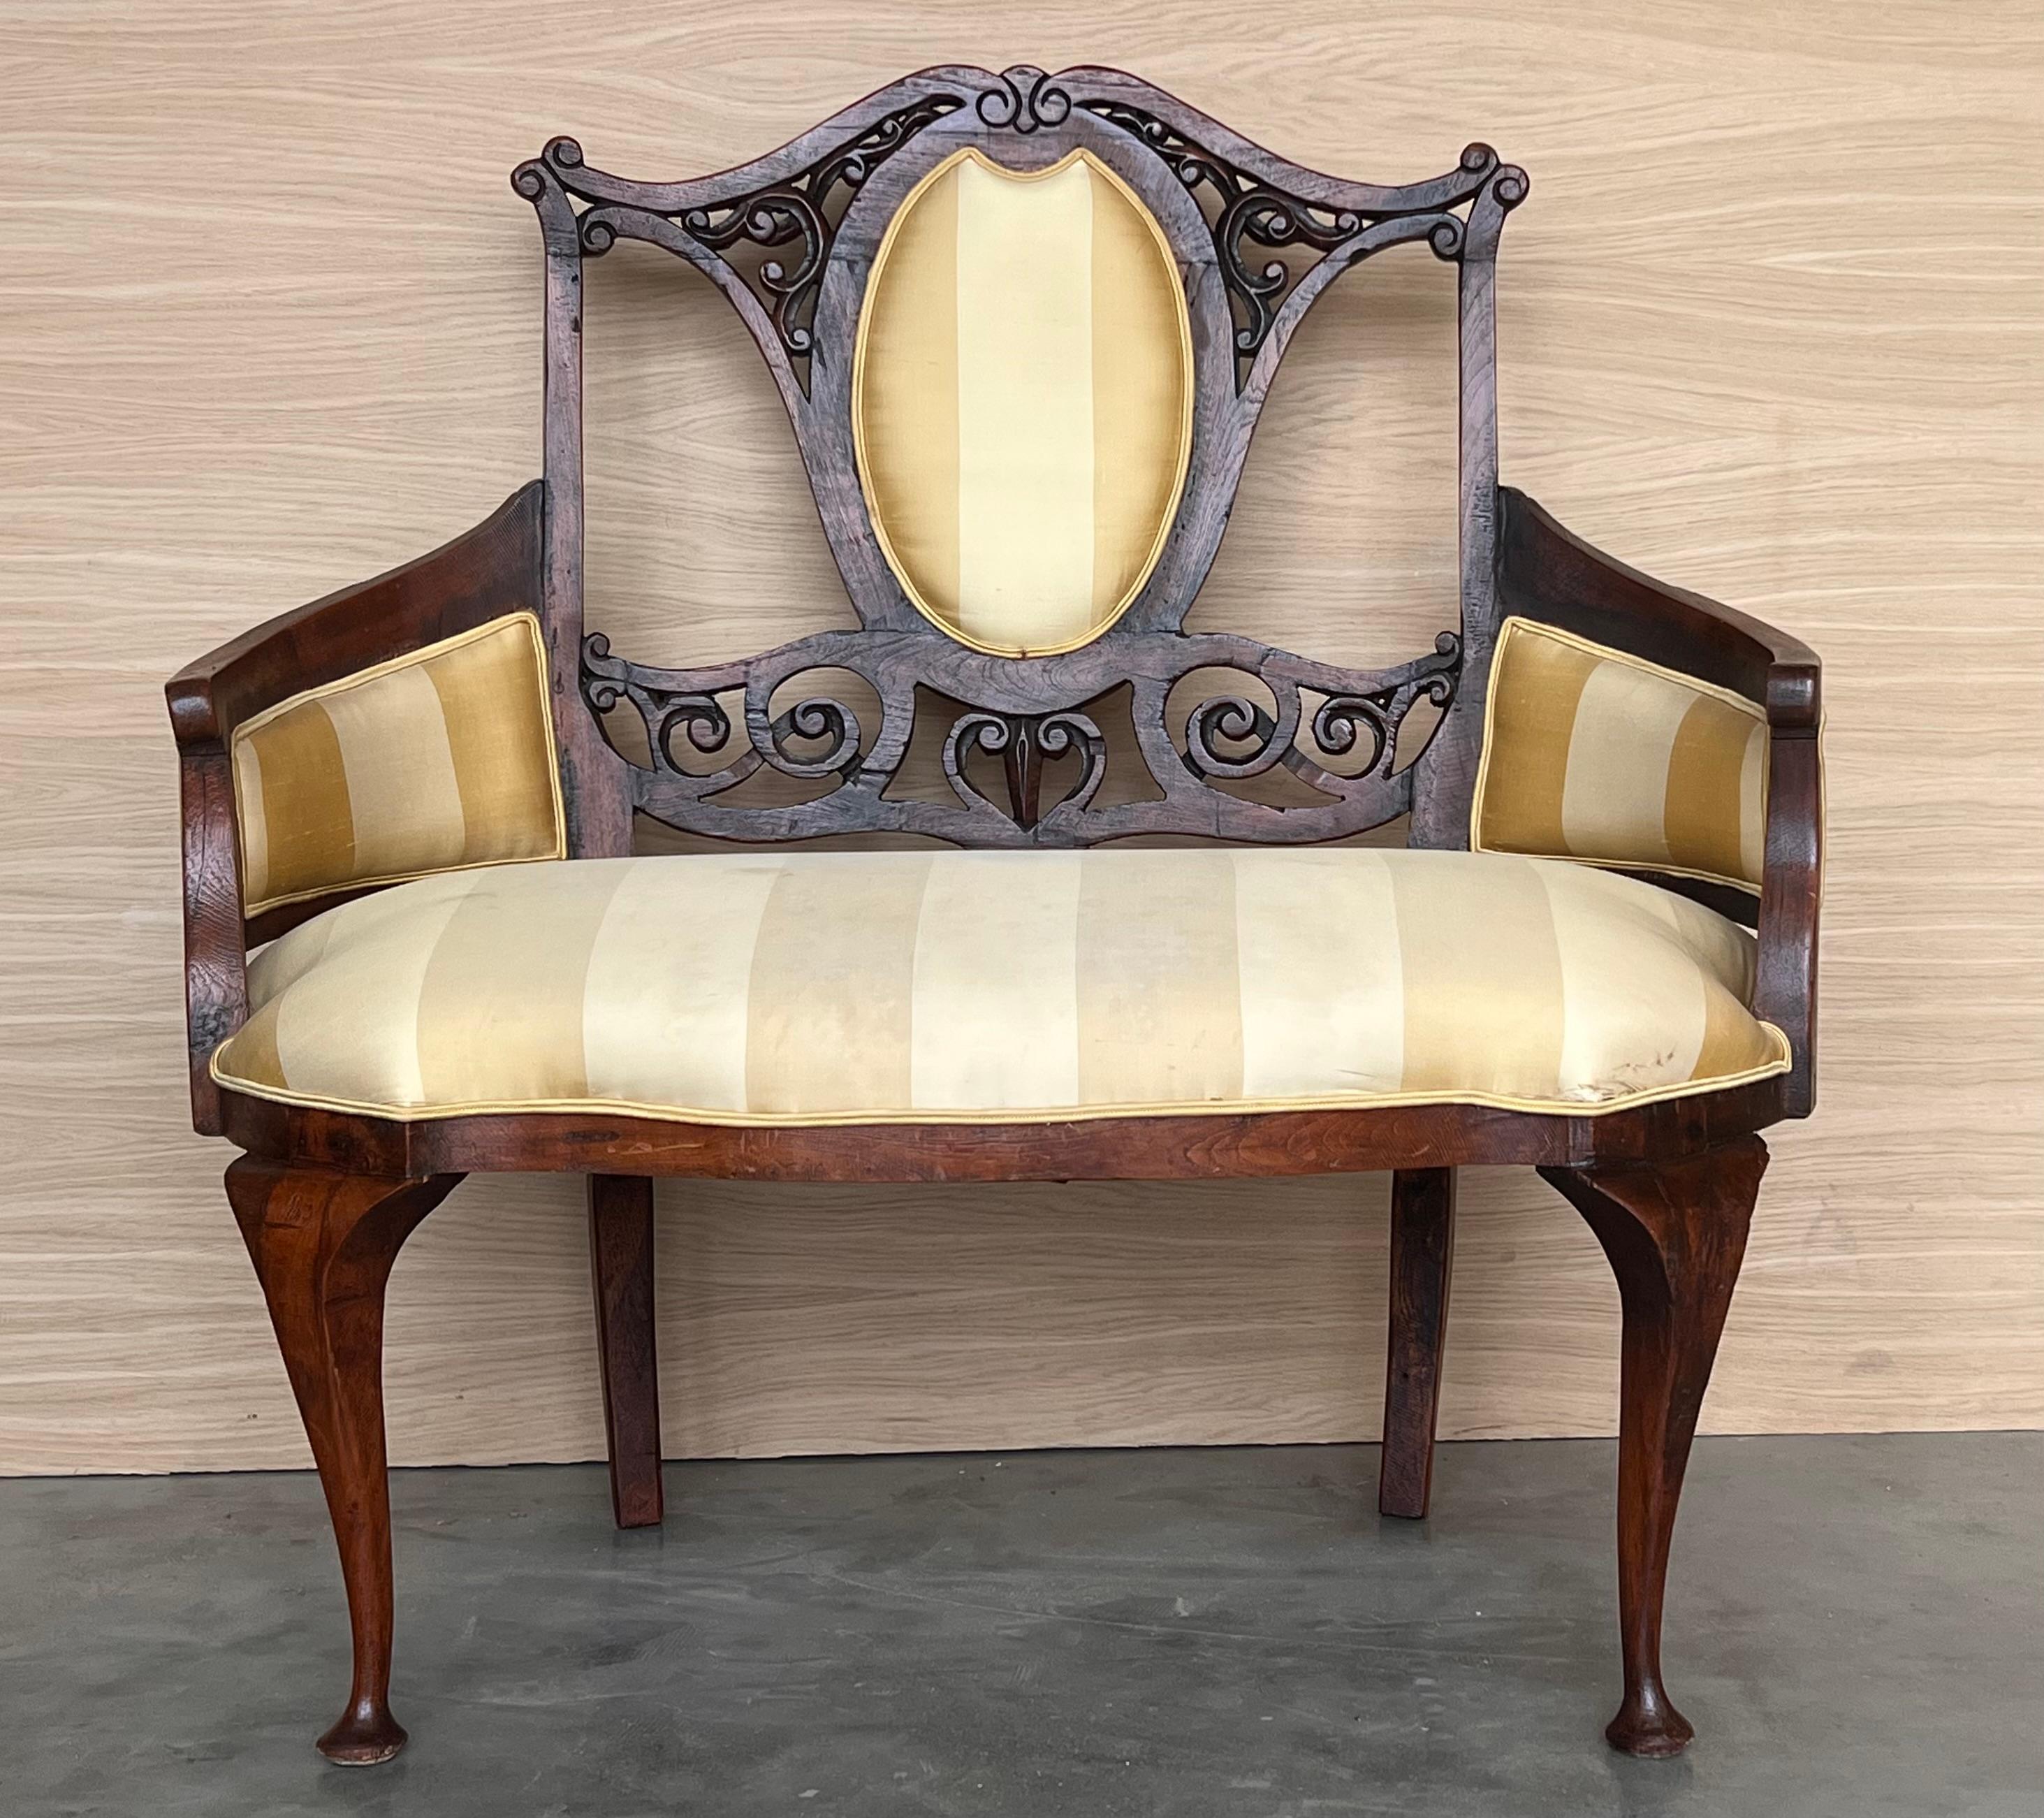 Incredible Art Nouveau  price of 2 Sofa Armchairs  
Material: Wood, reupholstered with springs and elastic band (as it was in the old days) If you have any questions we are at your disposal. 

The name 